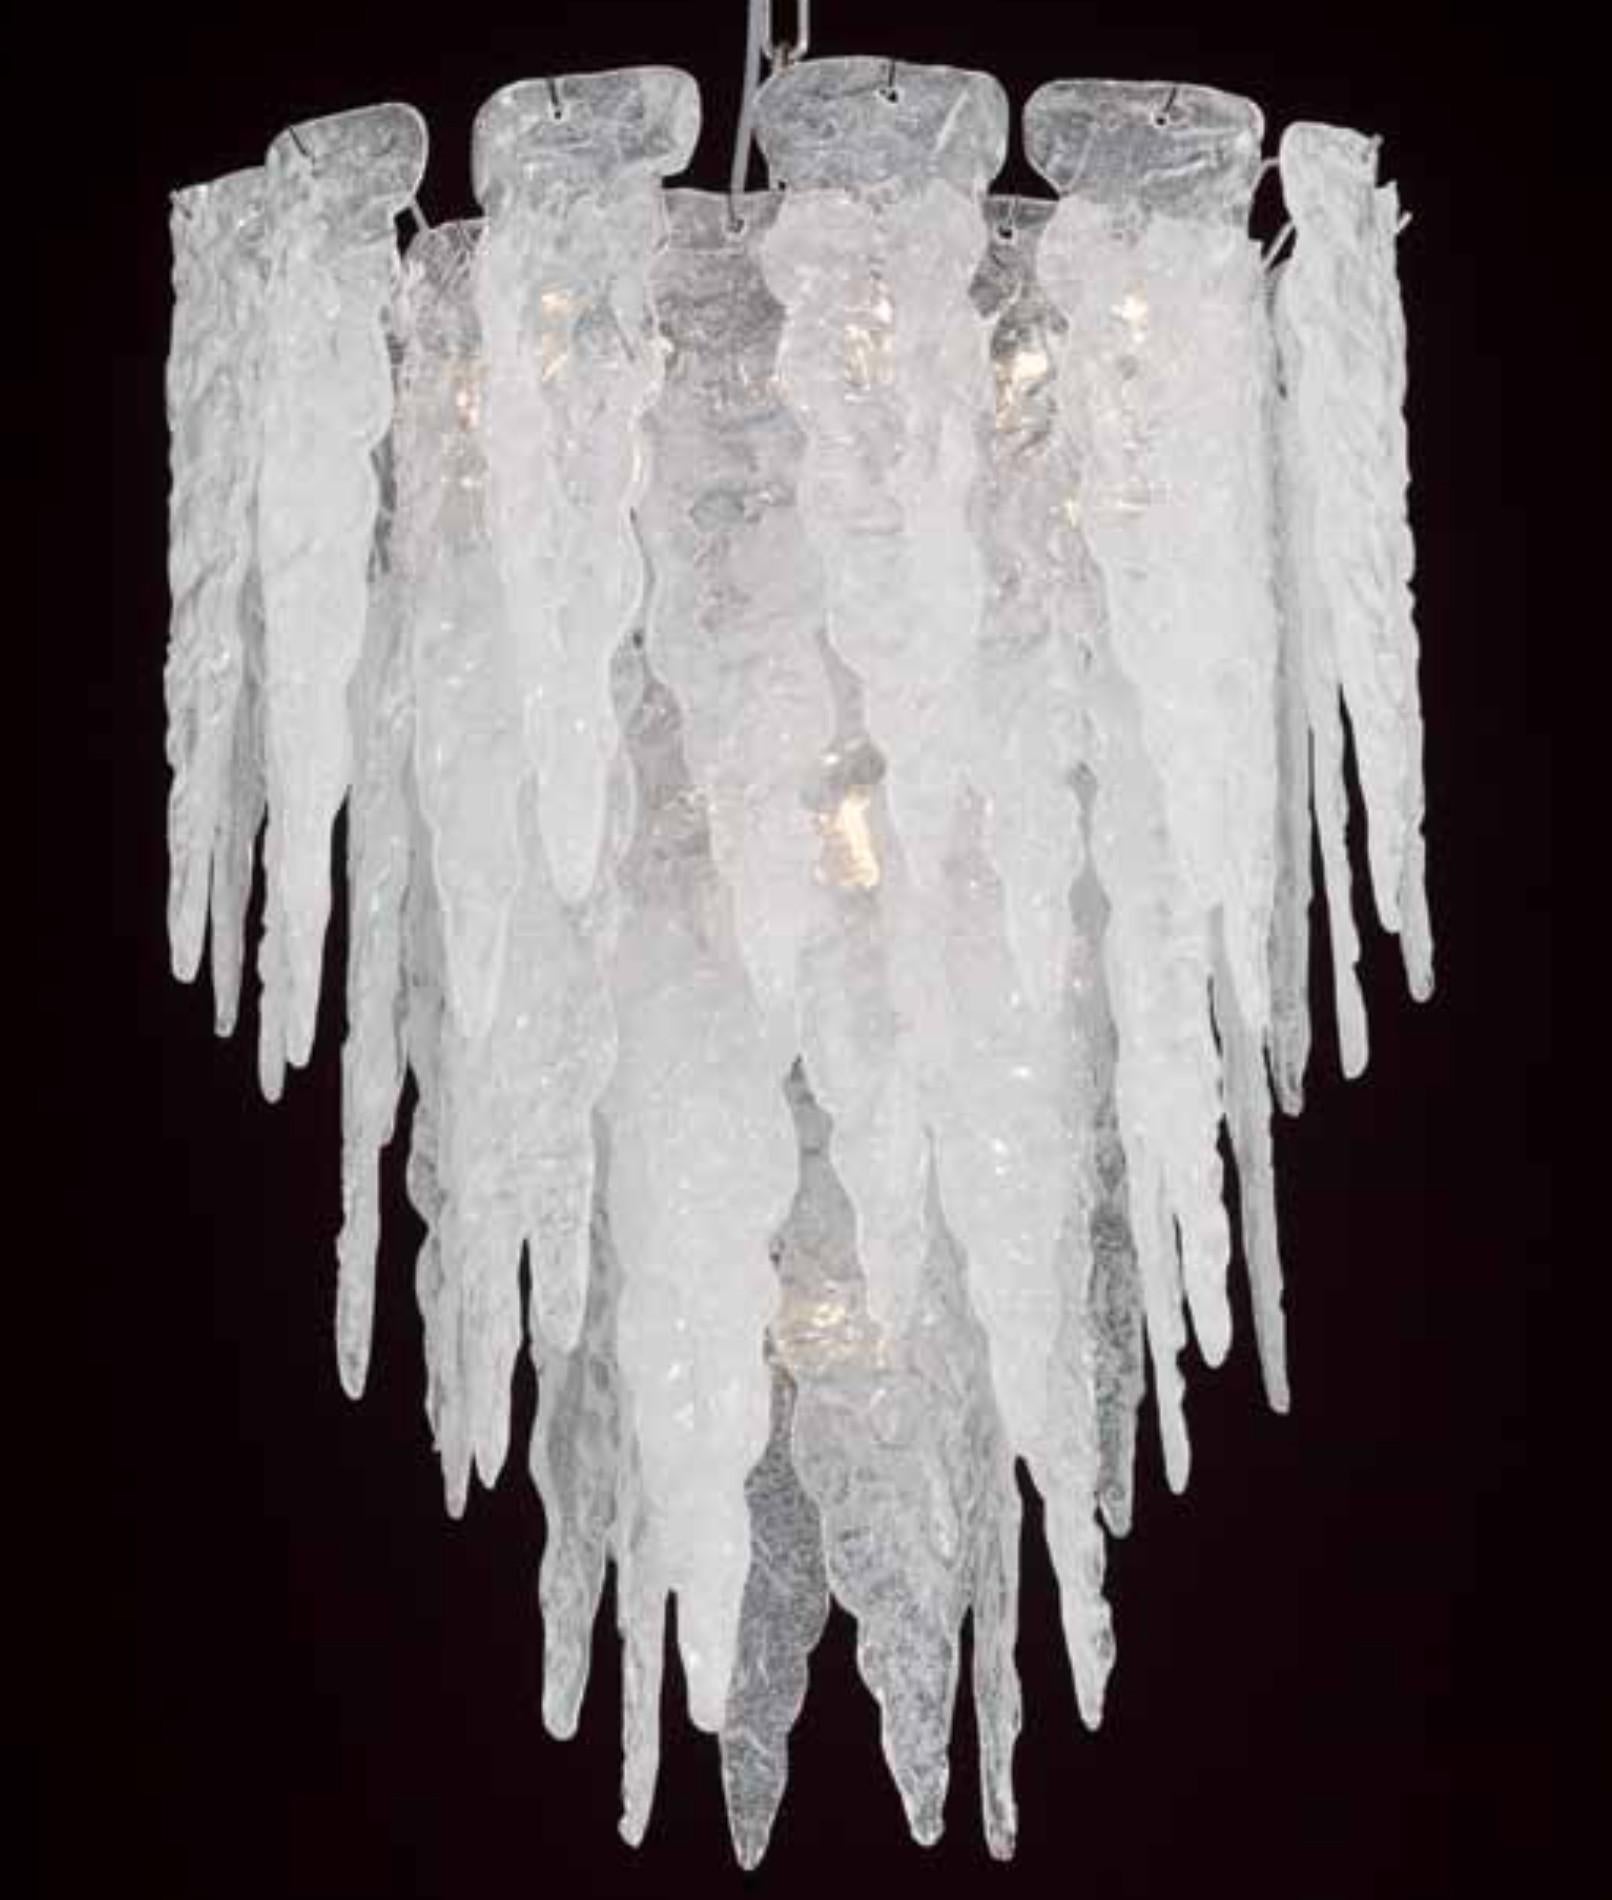 Italian chandelier shown with milky white Murano ice spikes glasses mounted on chrome finish frame, inspired by Mazzega / Made in Italy
7 lights / E12 or E14 type / max 40W each
Measures: Diameter 21.5 inches / height 27.5 inches plus chain and